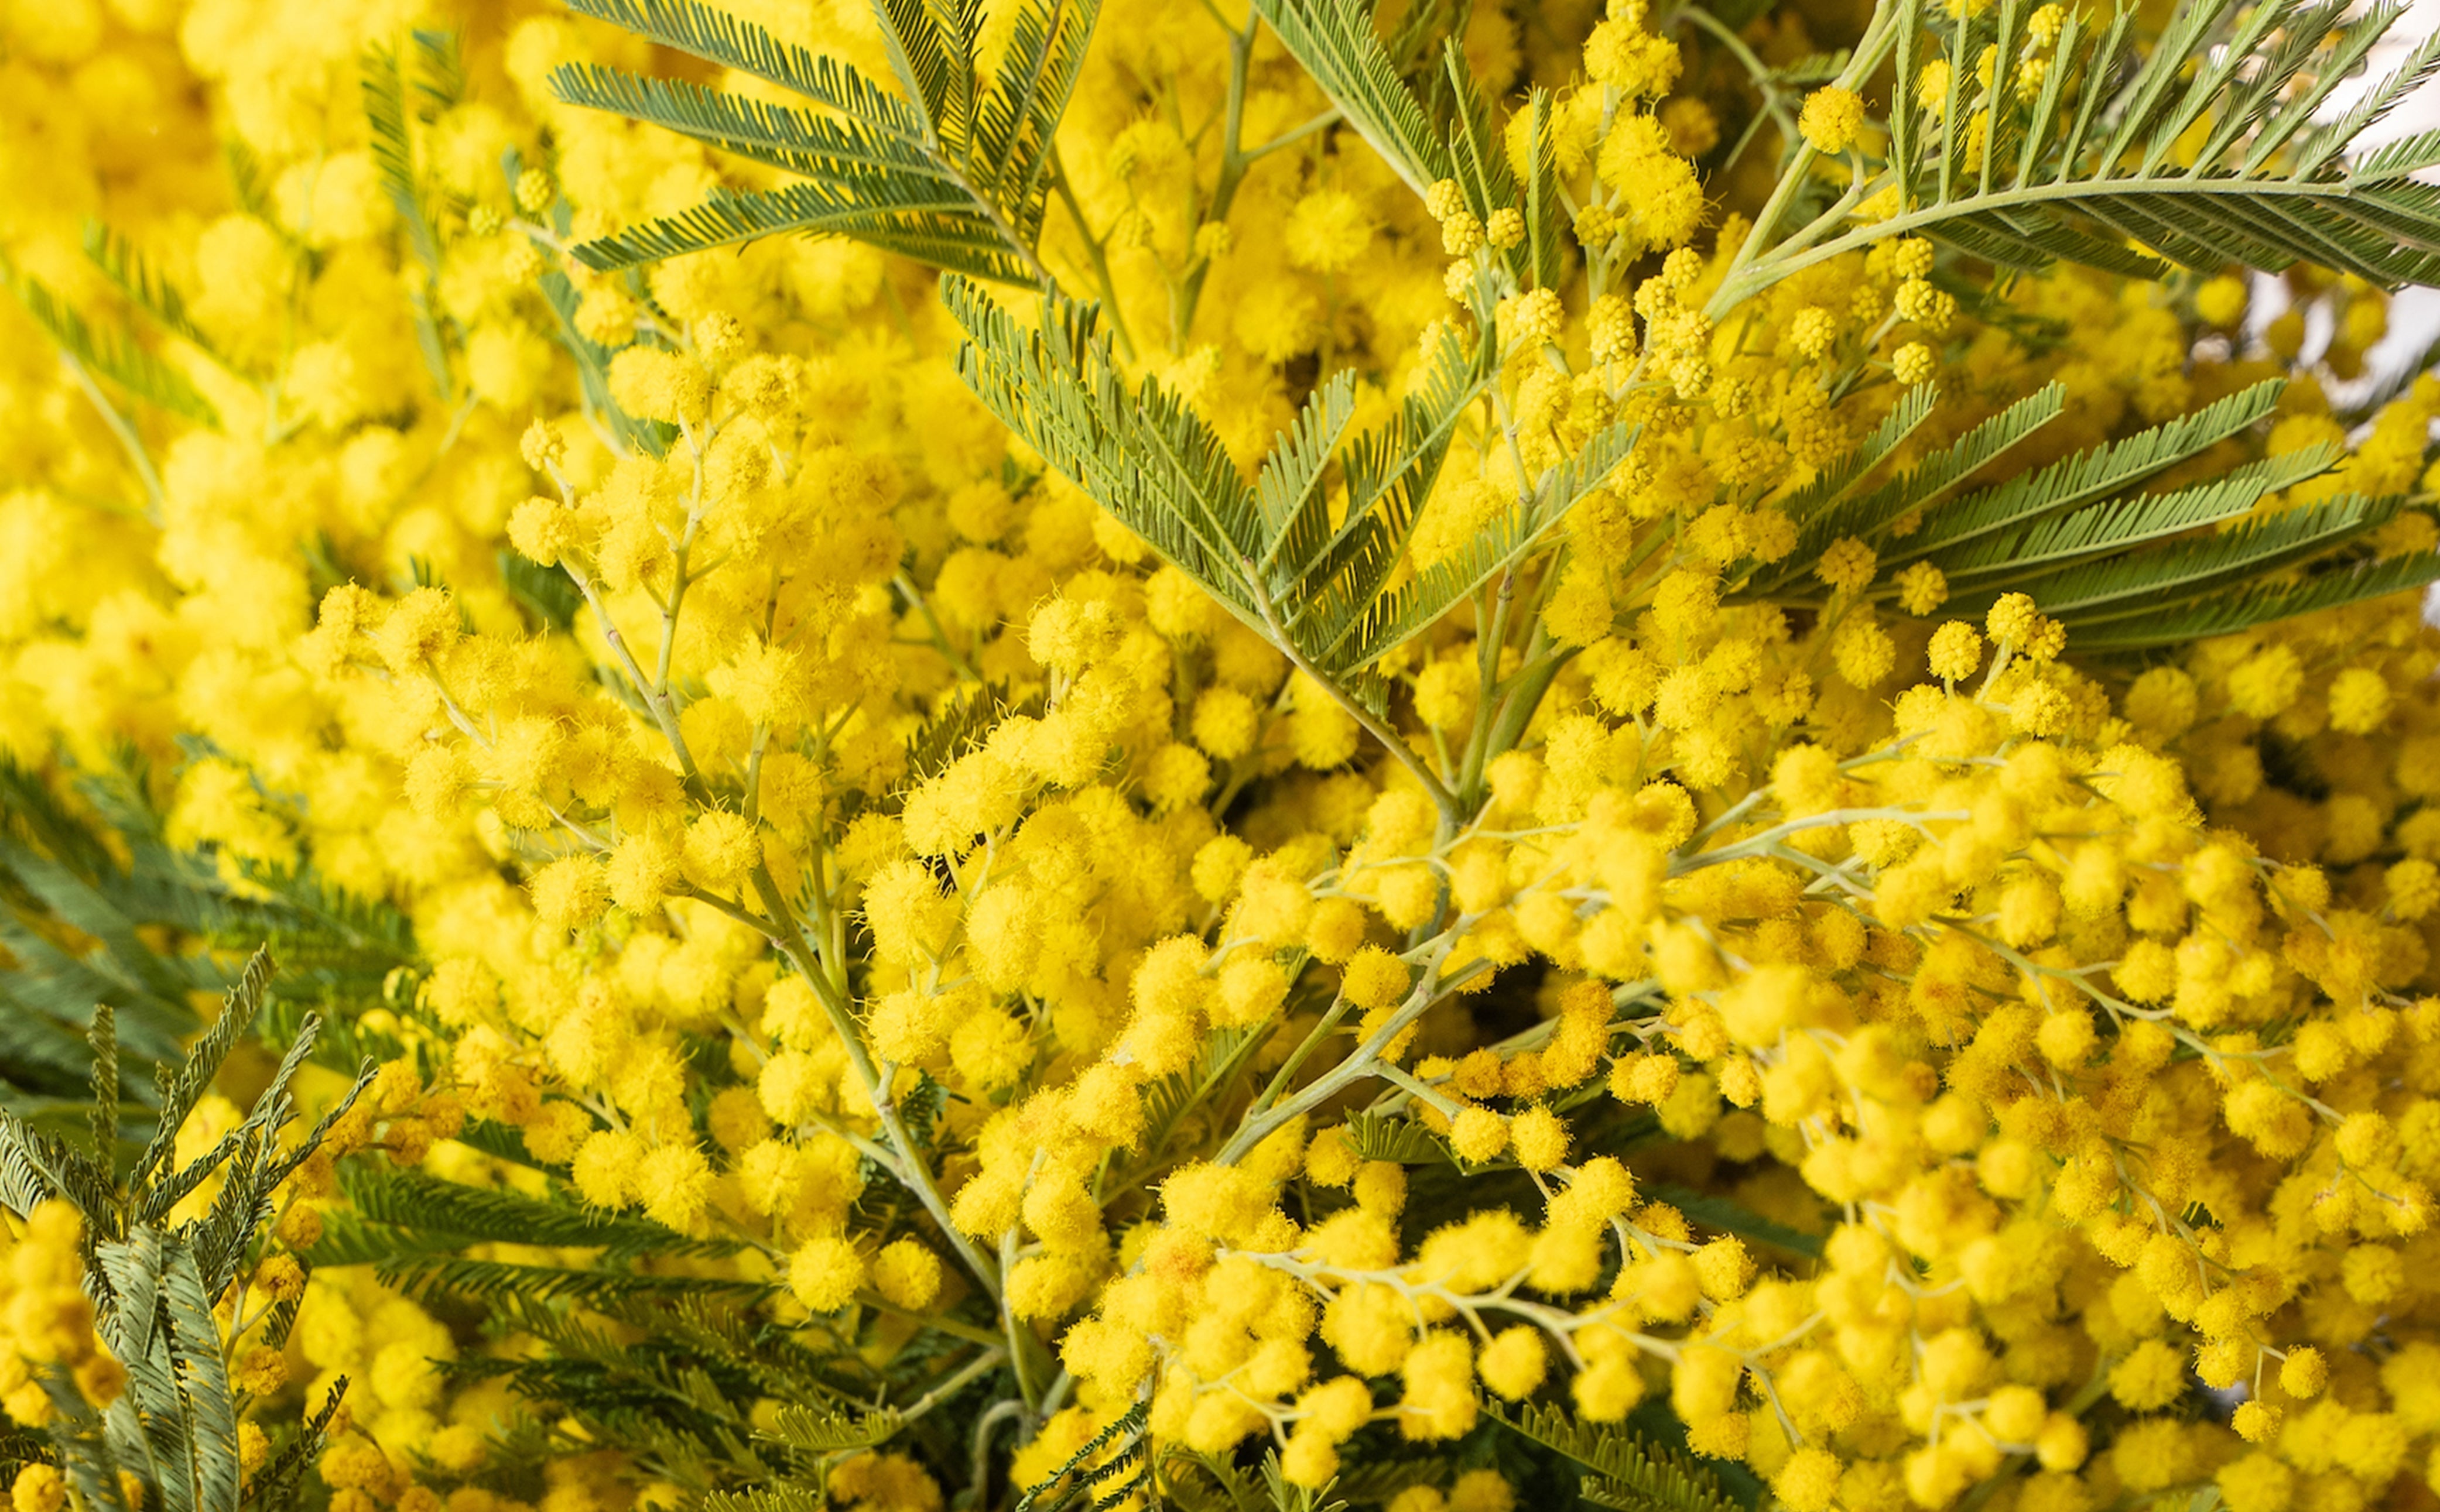 The language of Mimosa